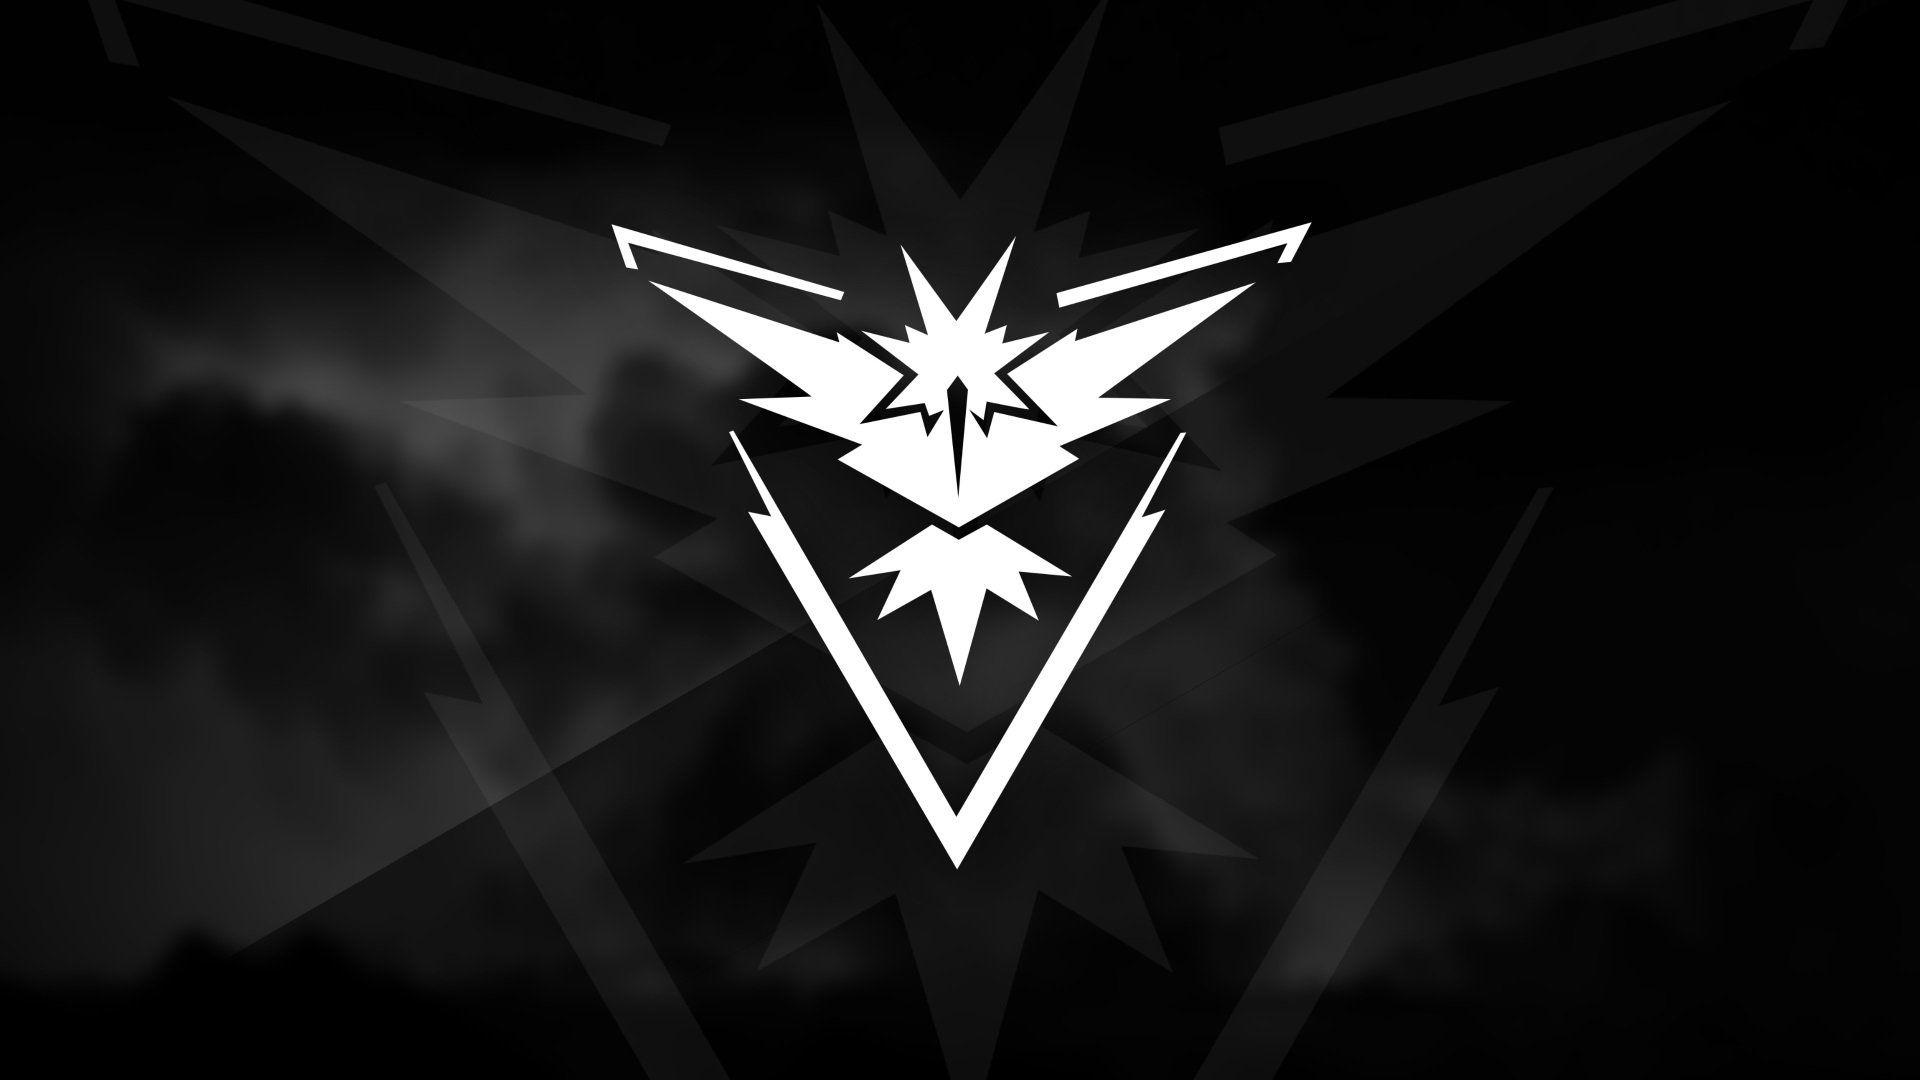 Team Instinct in black and white Full HD Wallpaper and Background